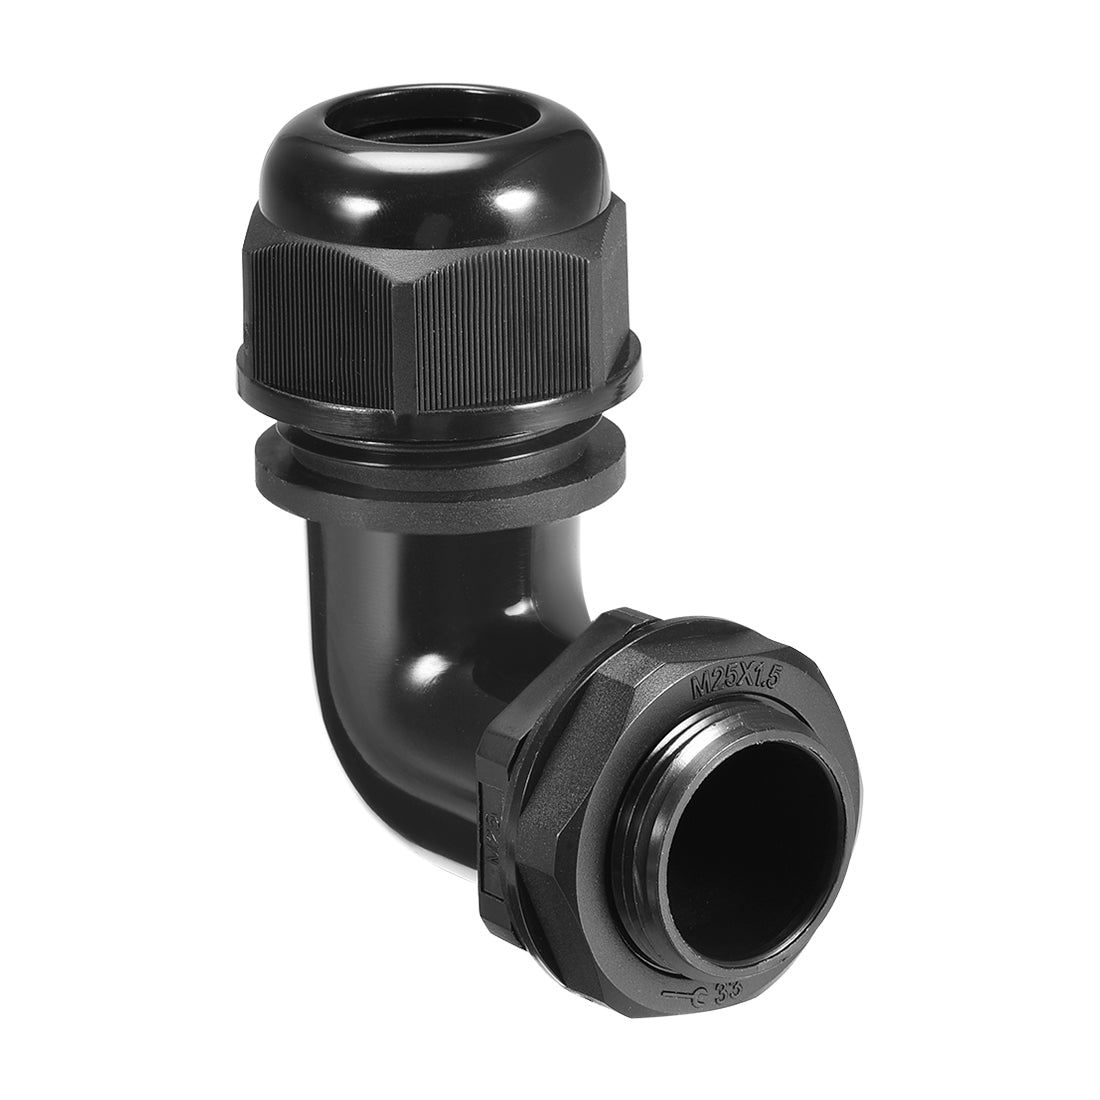 uxcell Uxcell M25 Cable Gland , 90 Degree Waterproof IP68 Nylon Joint Adjustable Locknut for 10mm-14mm Dia Cable Wire